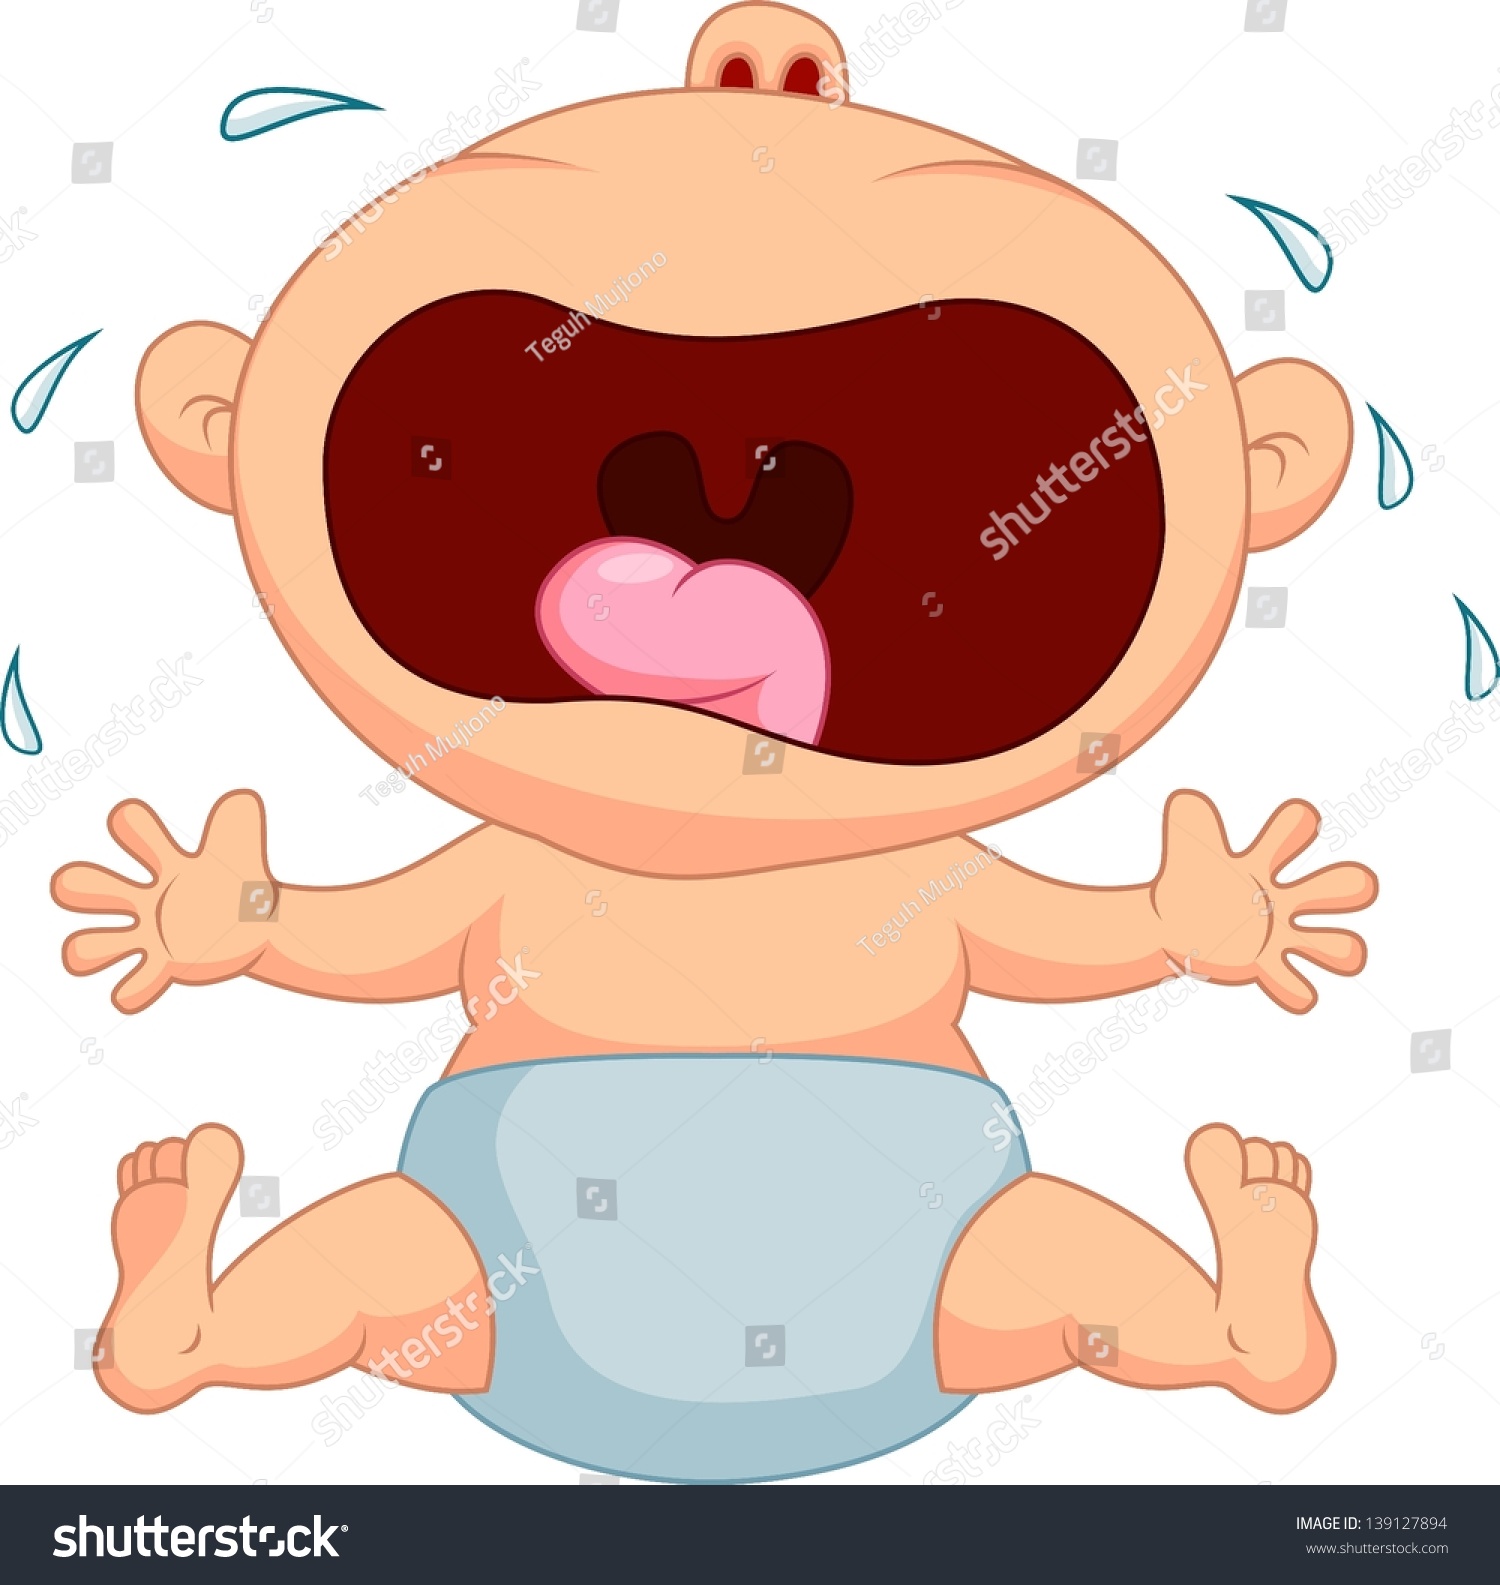 Baby Crying Stock Vector 139127894 - Shutterstock